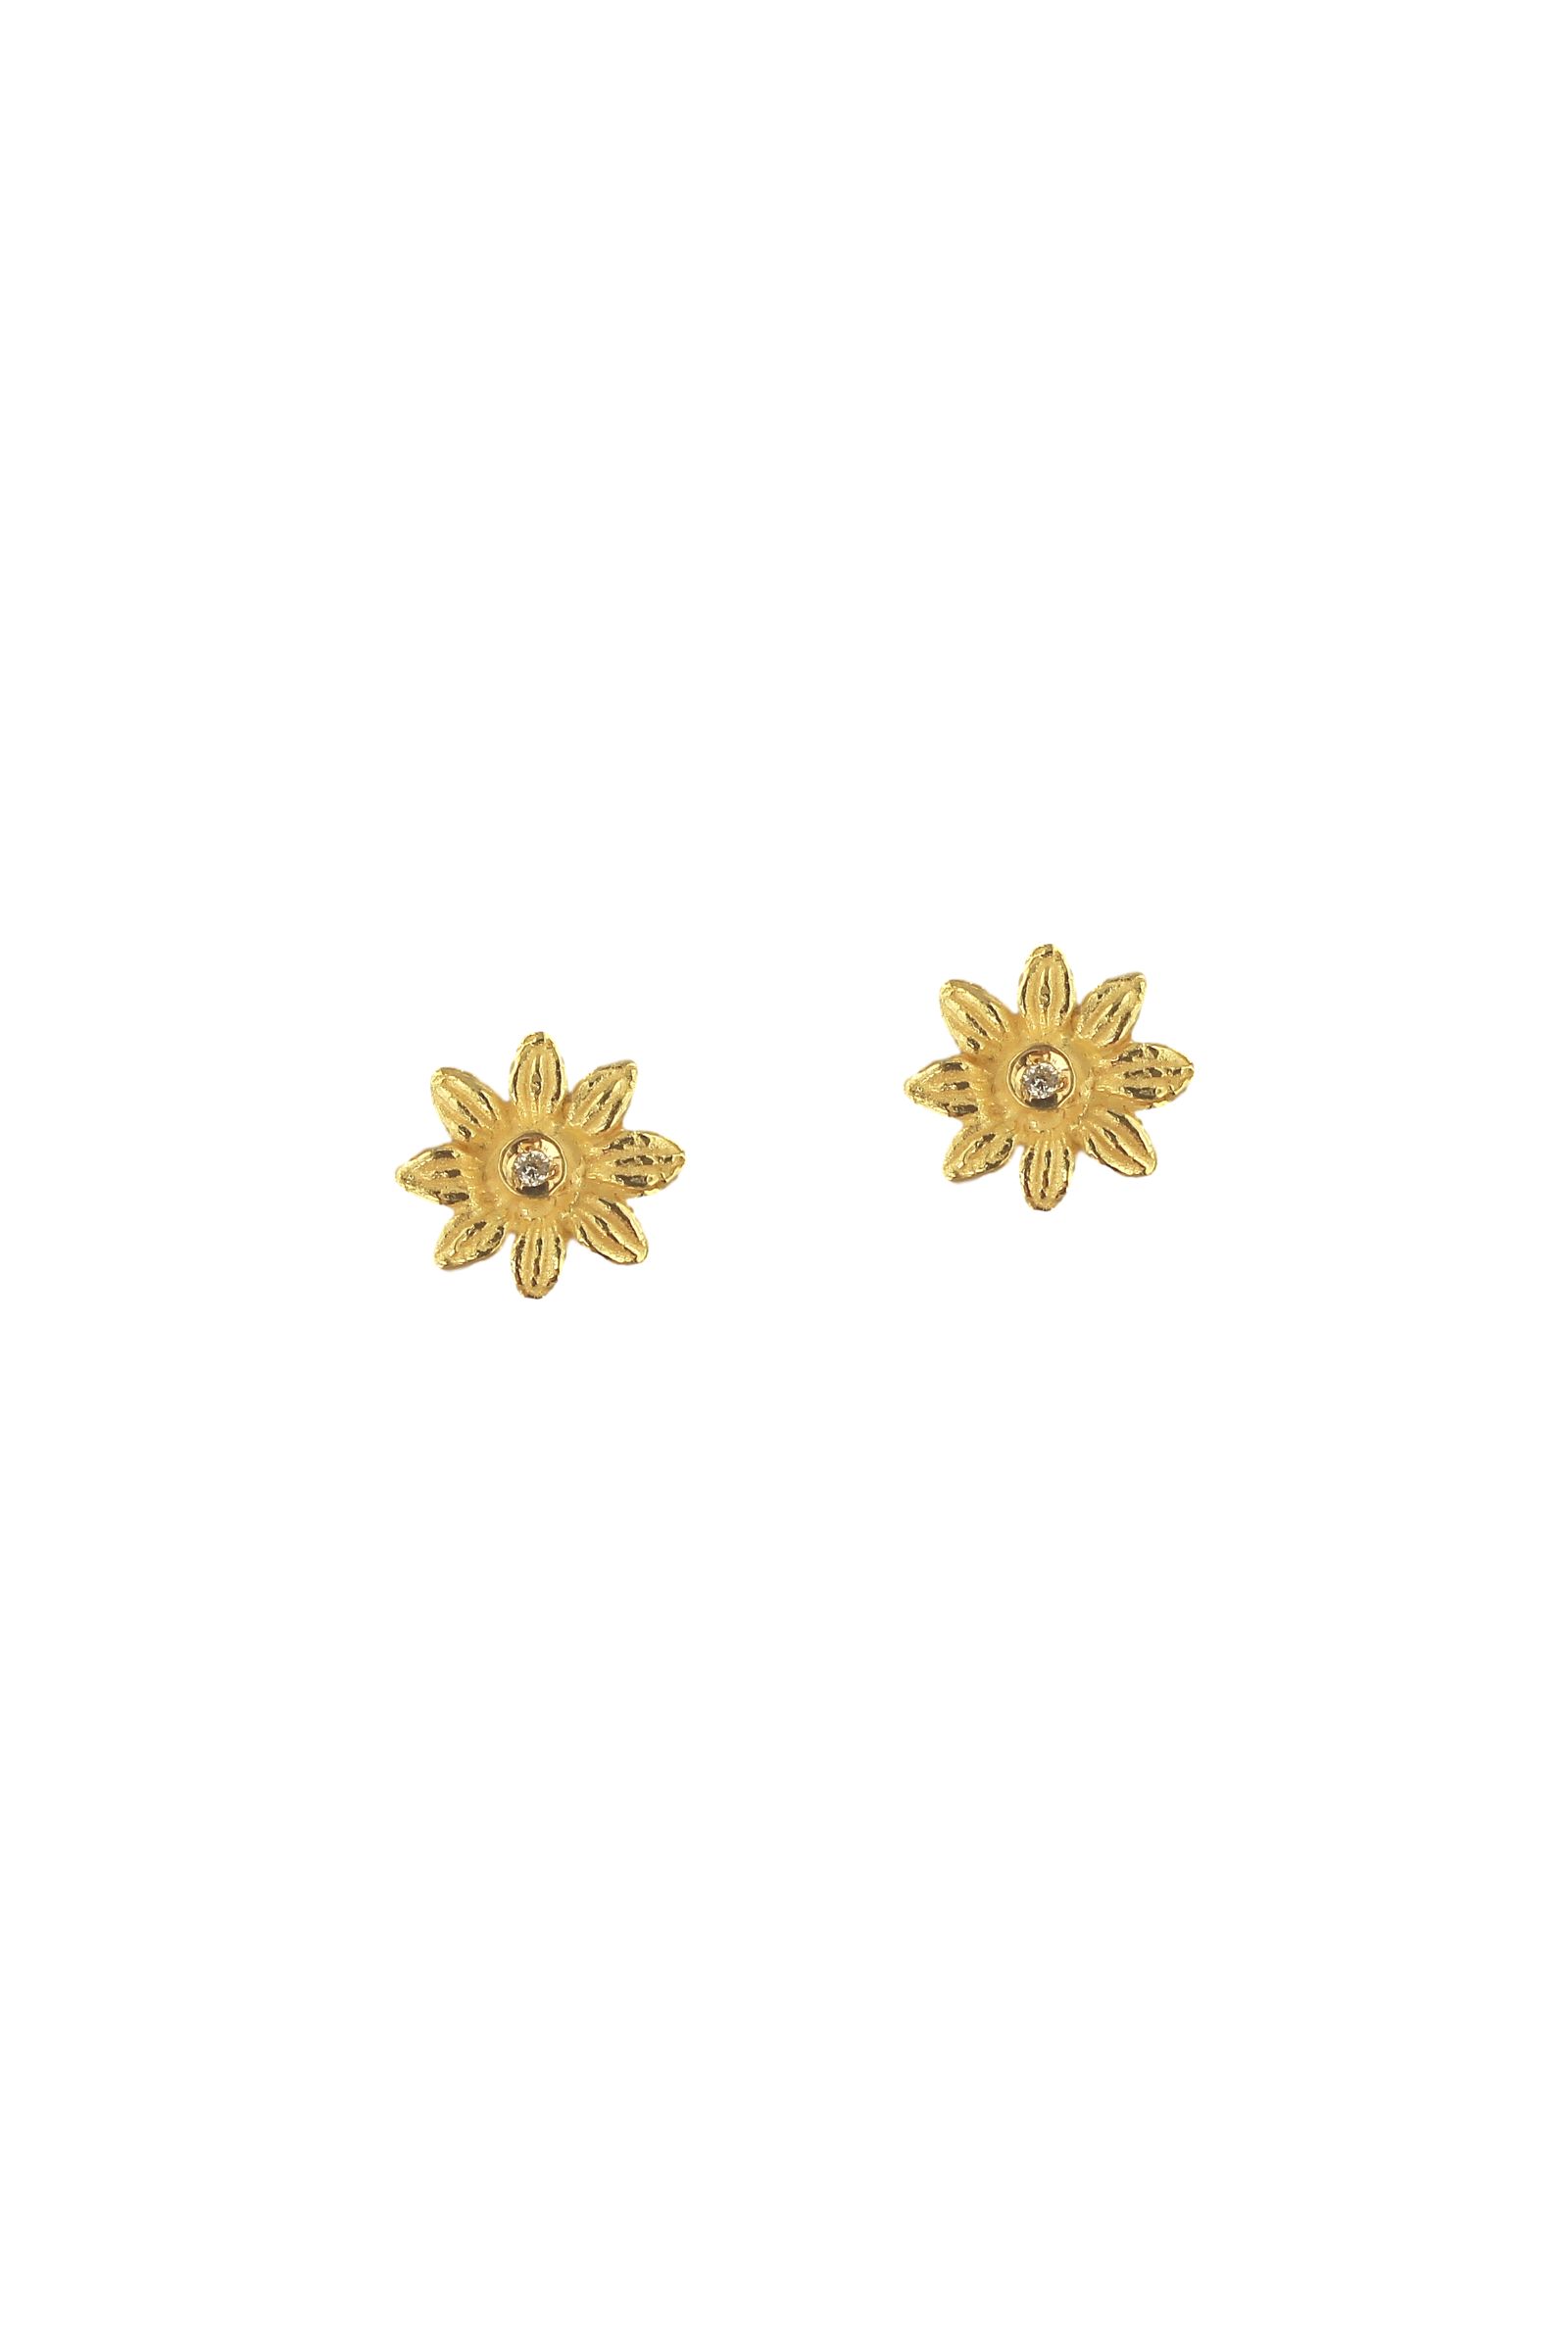 SD001H-18-Kt-Yellow-Gold-Flowers-Earrings-with-Diamonds-1_